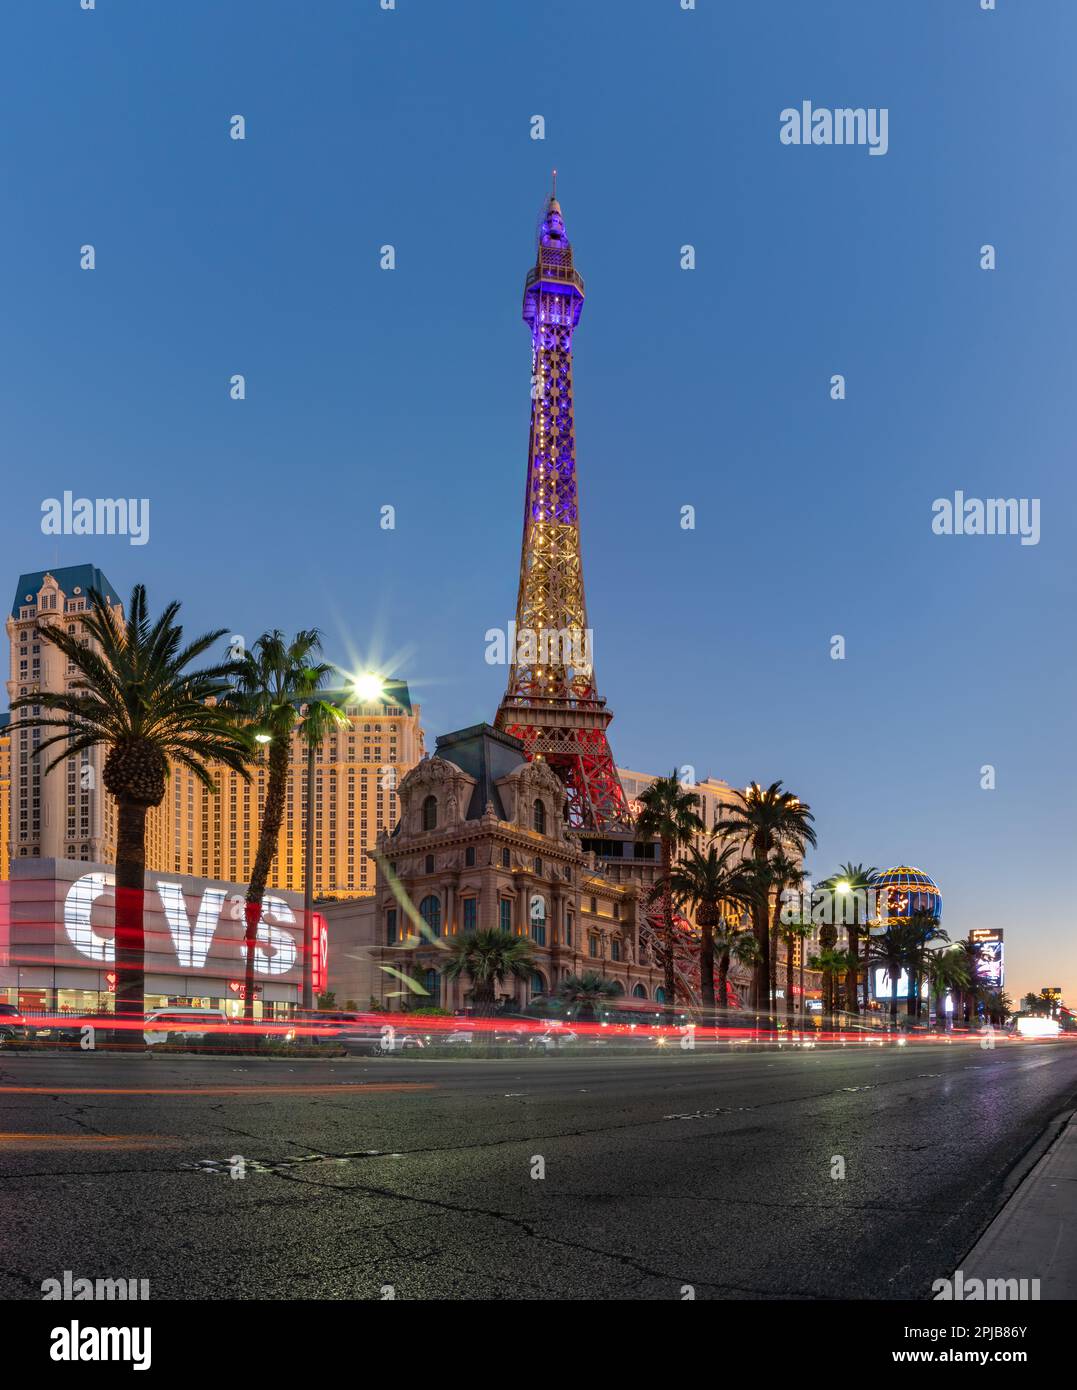 A picture of the Paris Las Vegas at sunset, with the Eiffel Tower decorated with the colors of the French flag. Stock Photo